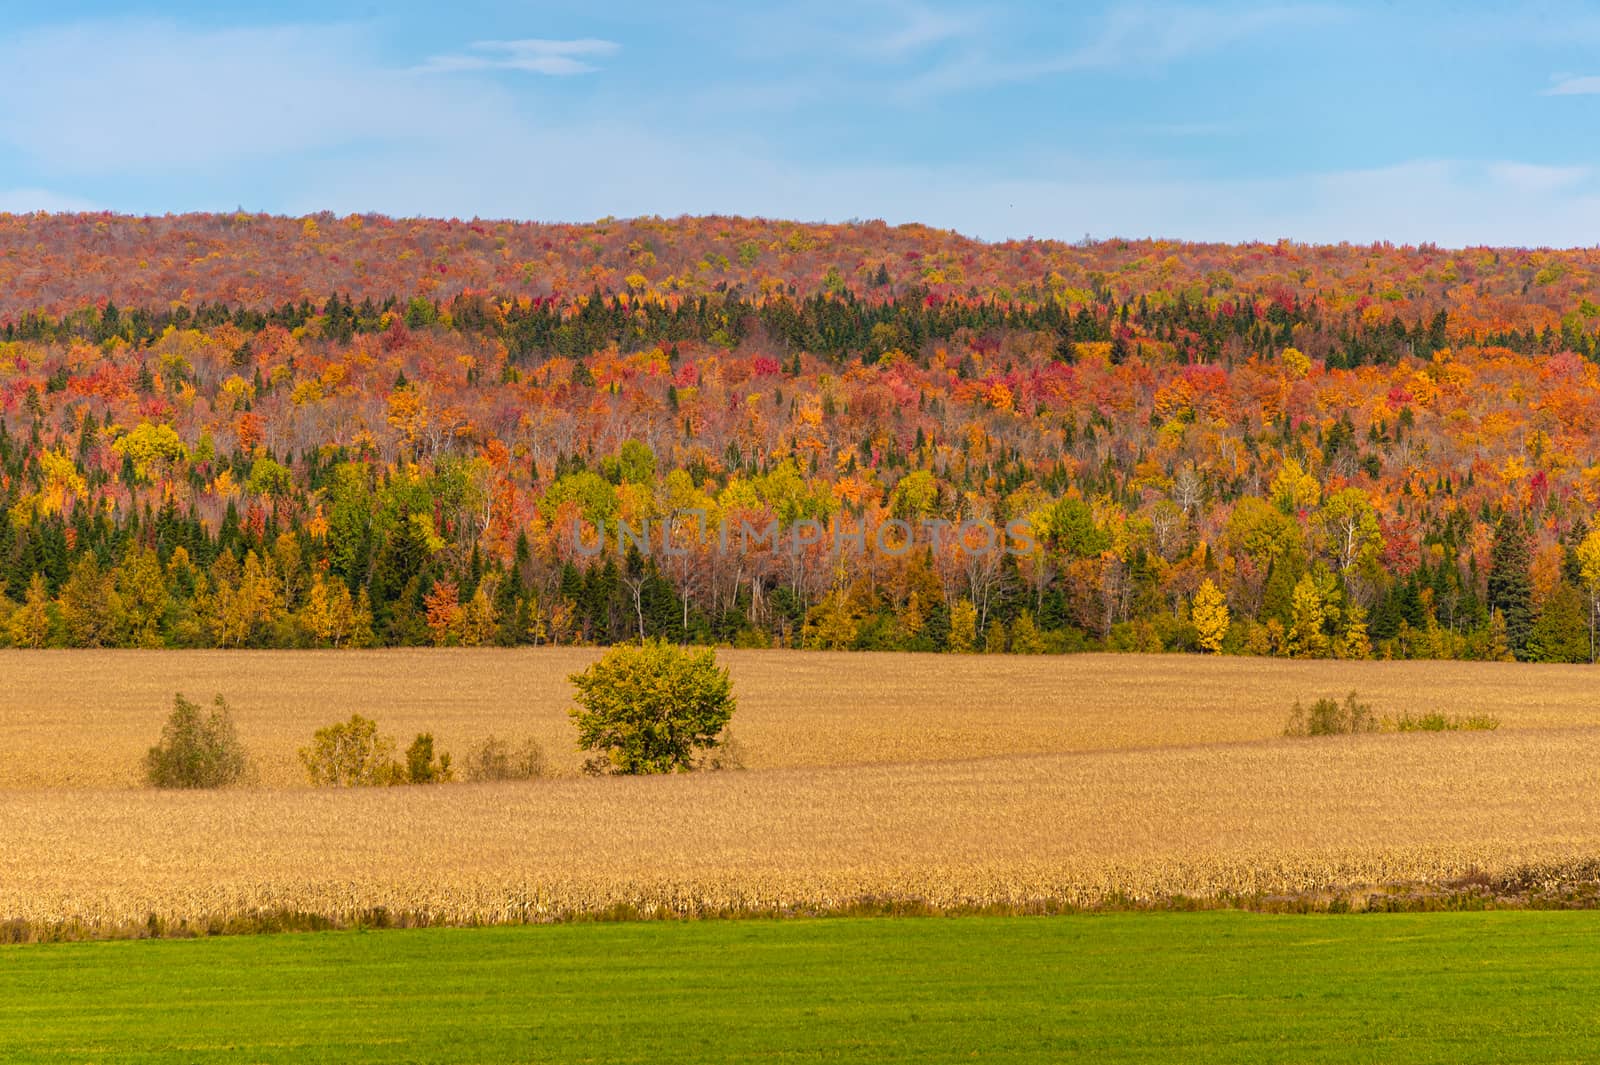 Trees with autumn foliage at sunset in the Quebec countryside